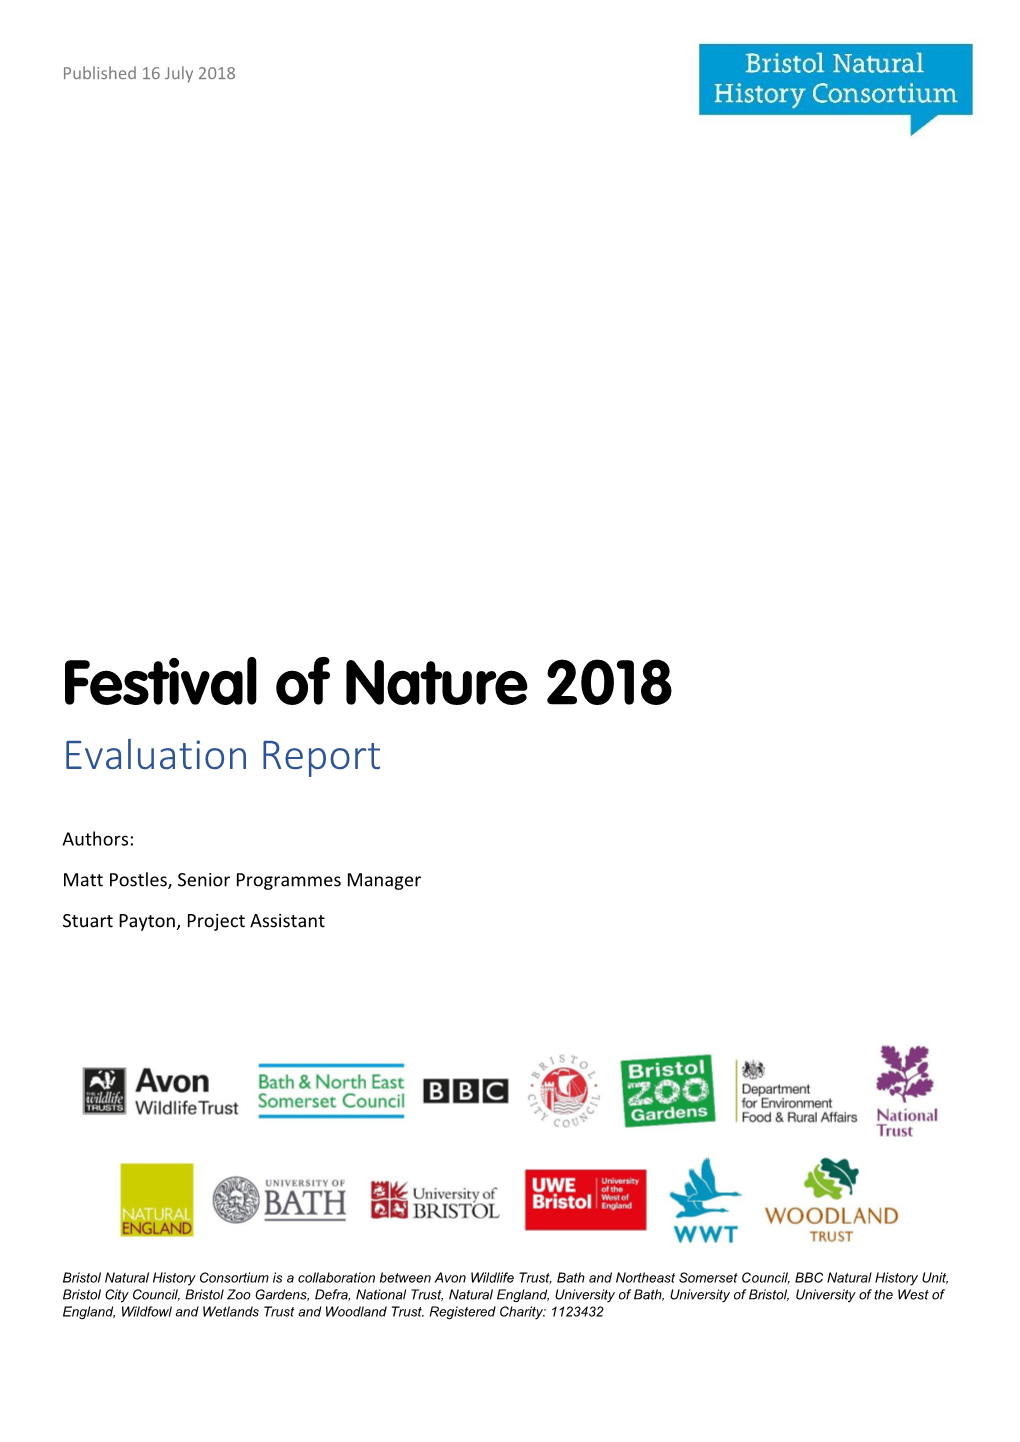 Festival of Nature 2018 Evaluation Report